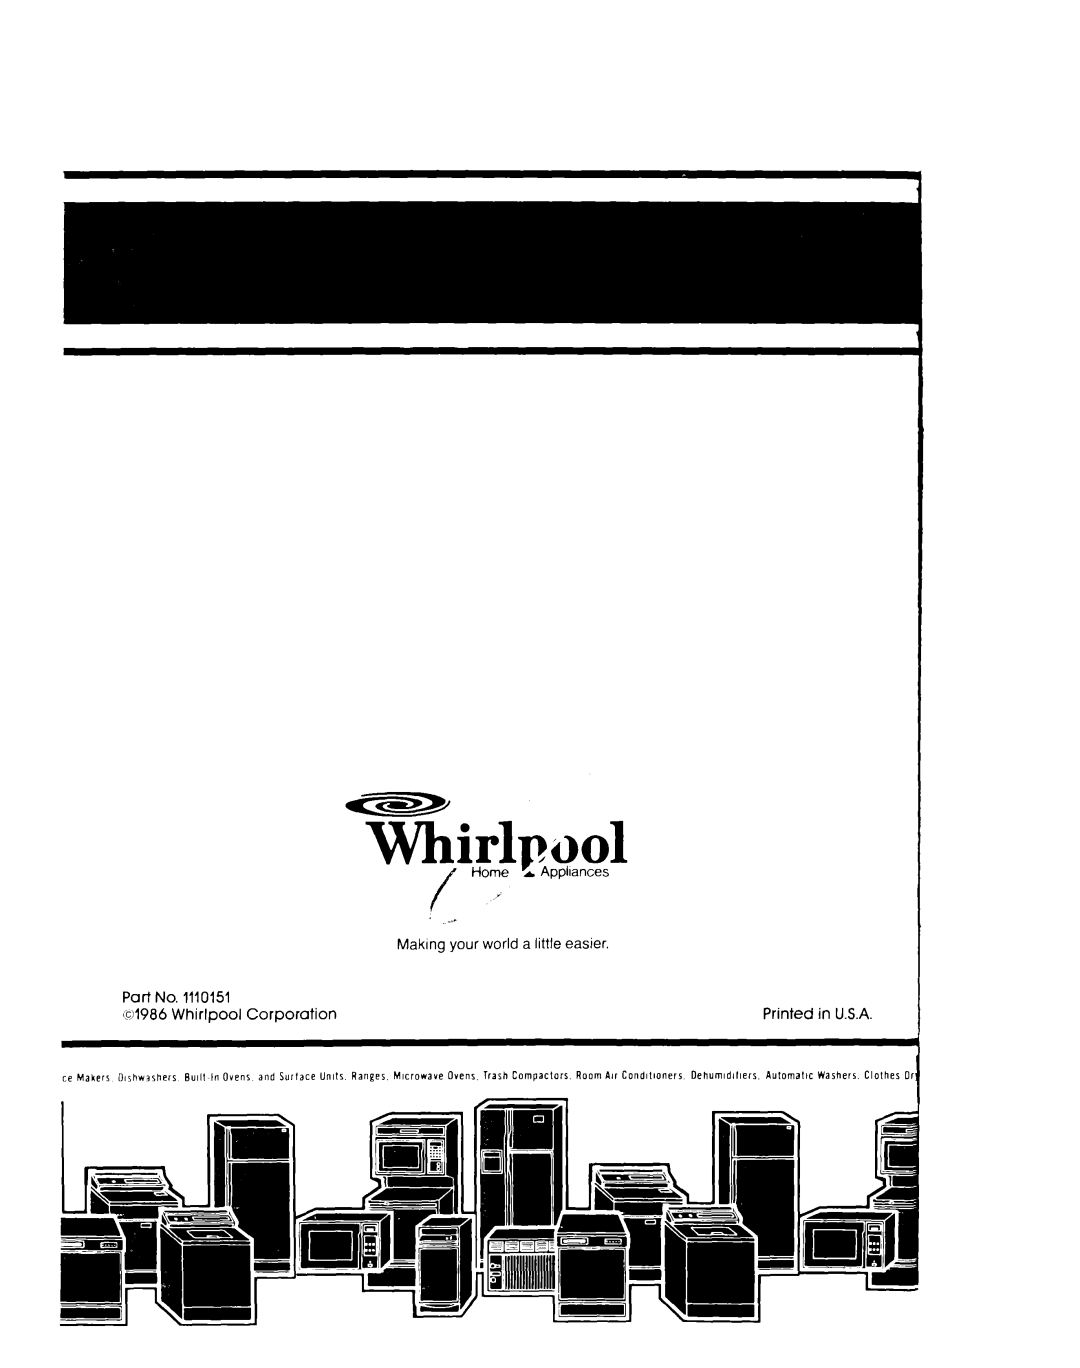 Whirlpool ET1NK manual Making your world a little easier, Pari No, 01986, Whirlpool, Corporation, in USA, Printed 